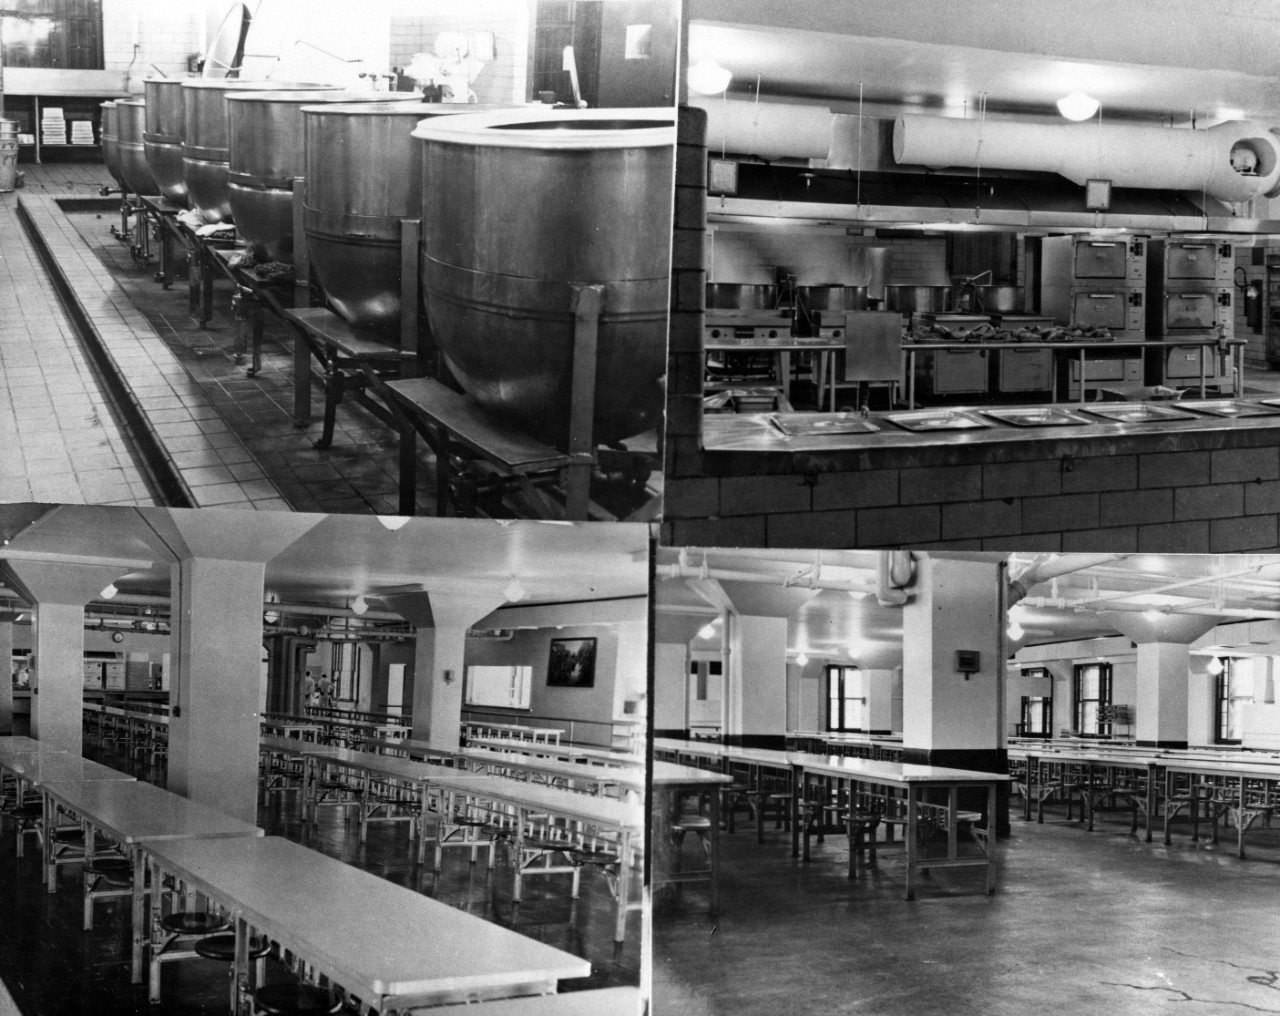 Mess Hall, Cooking Pots, Steam Line